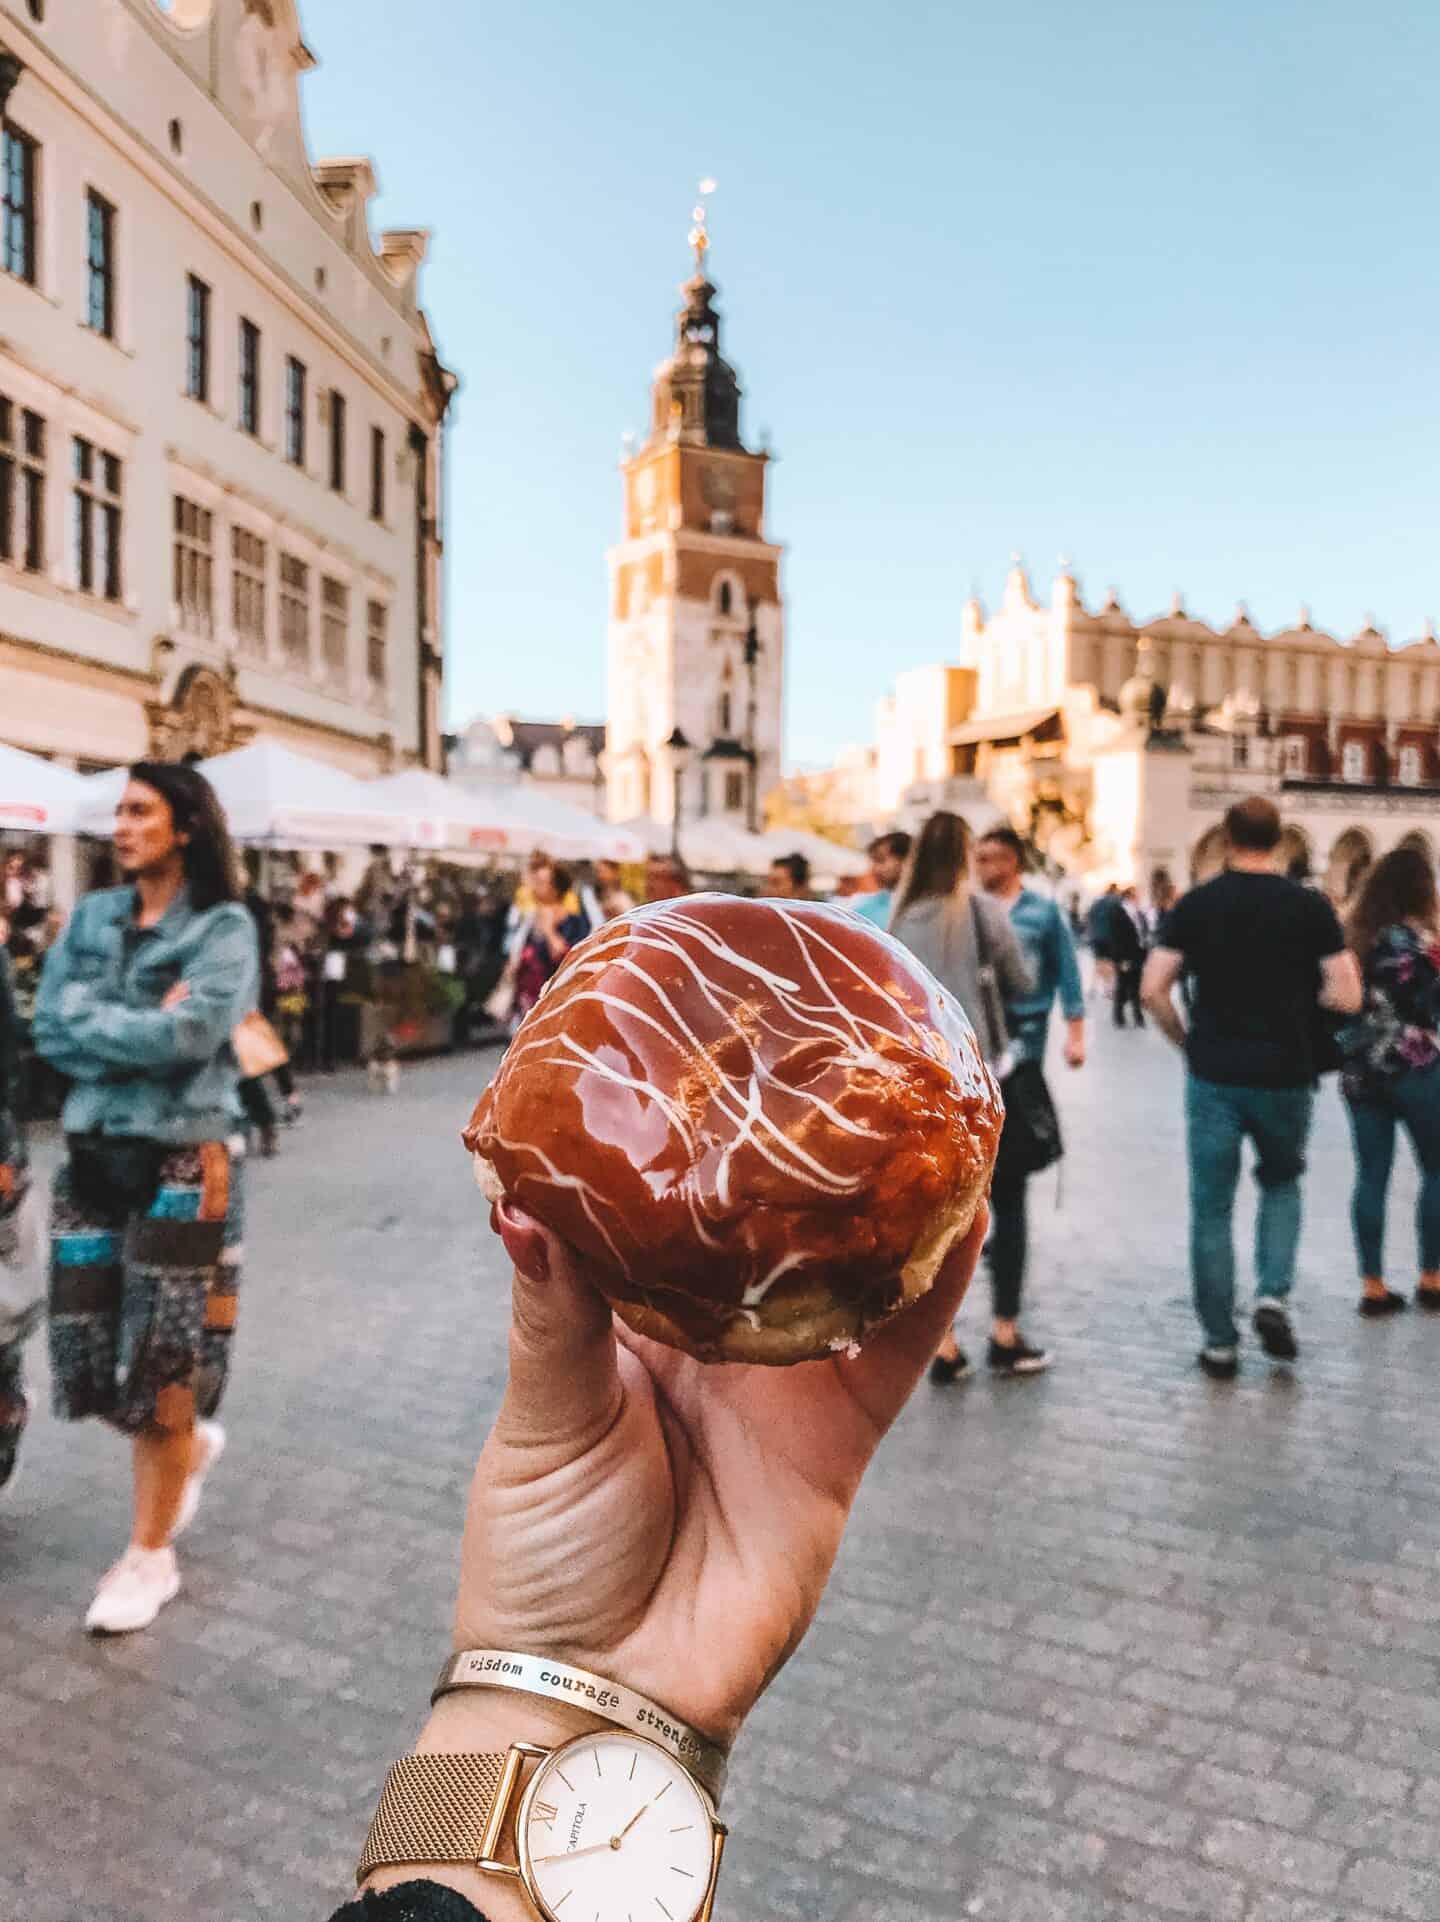 One of the best Krakow traditional foods is the paczki – or Polish donut